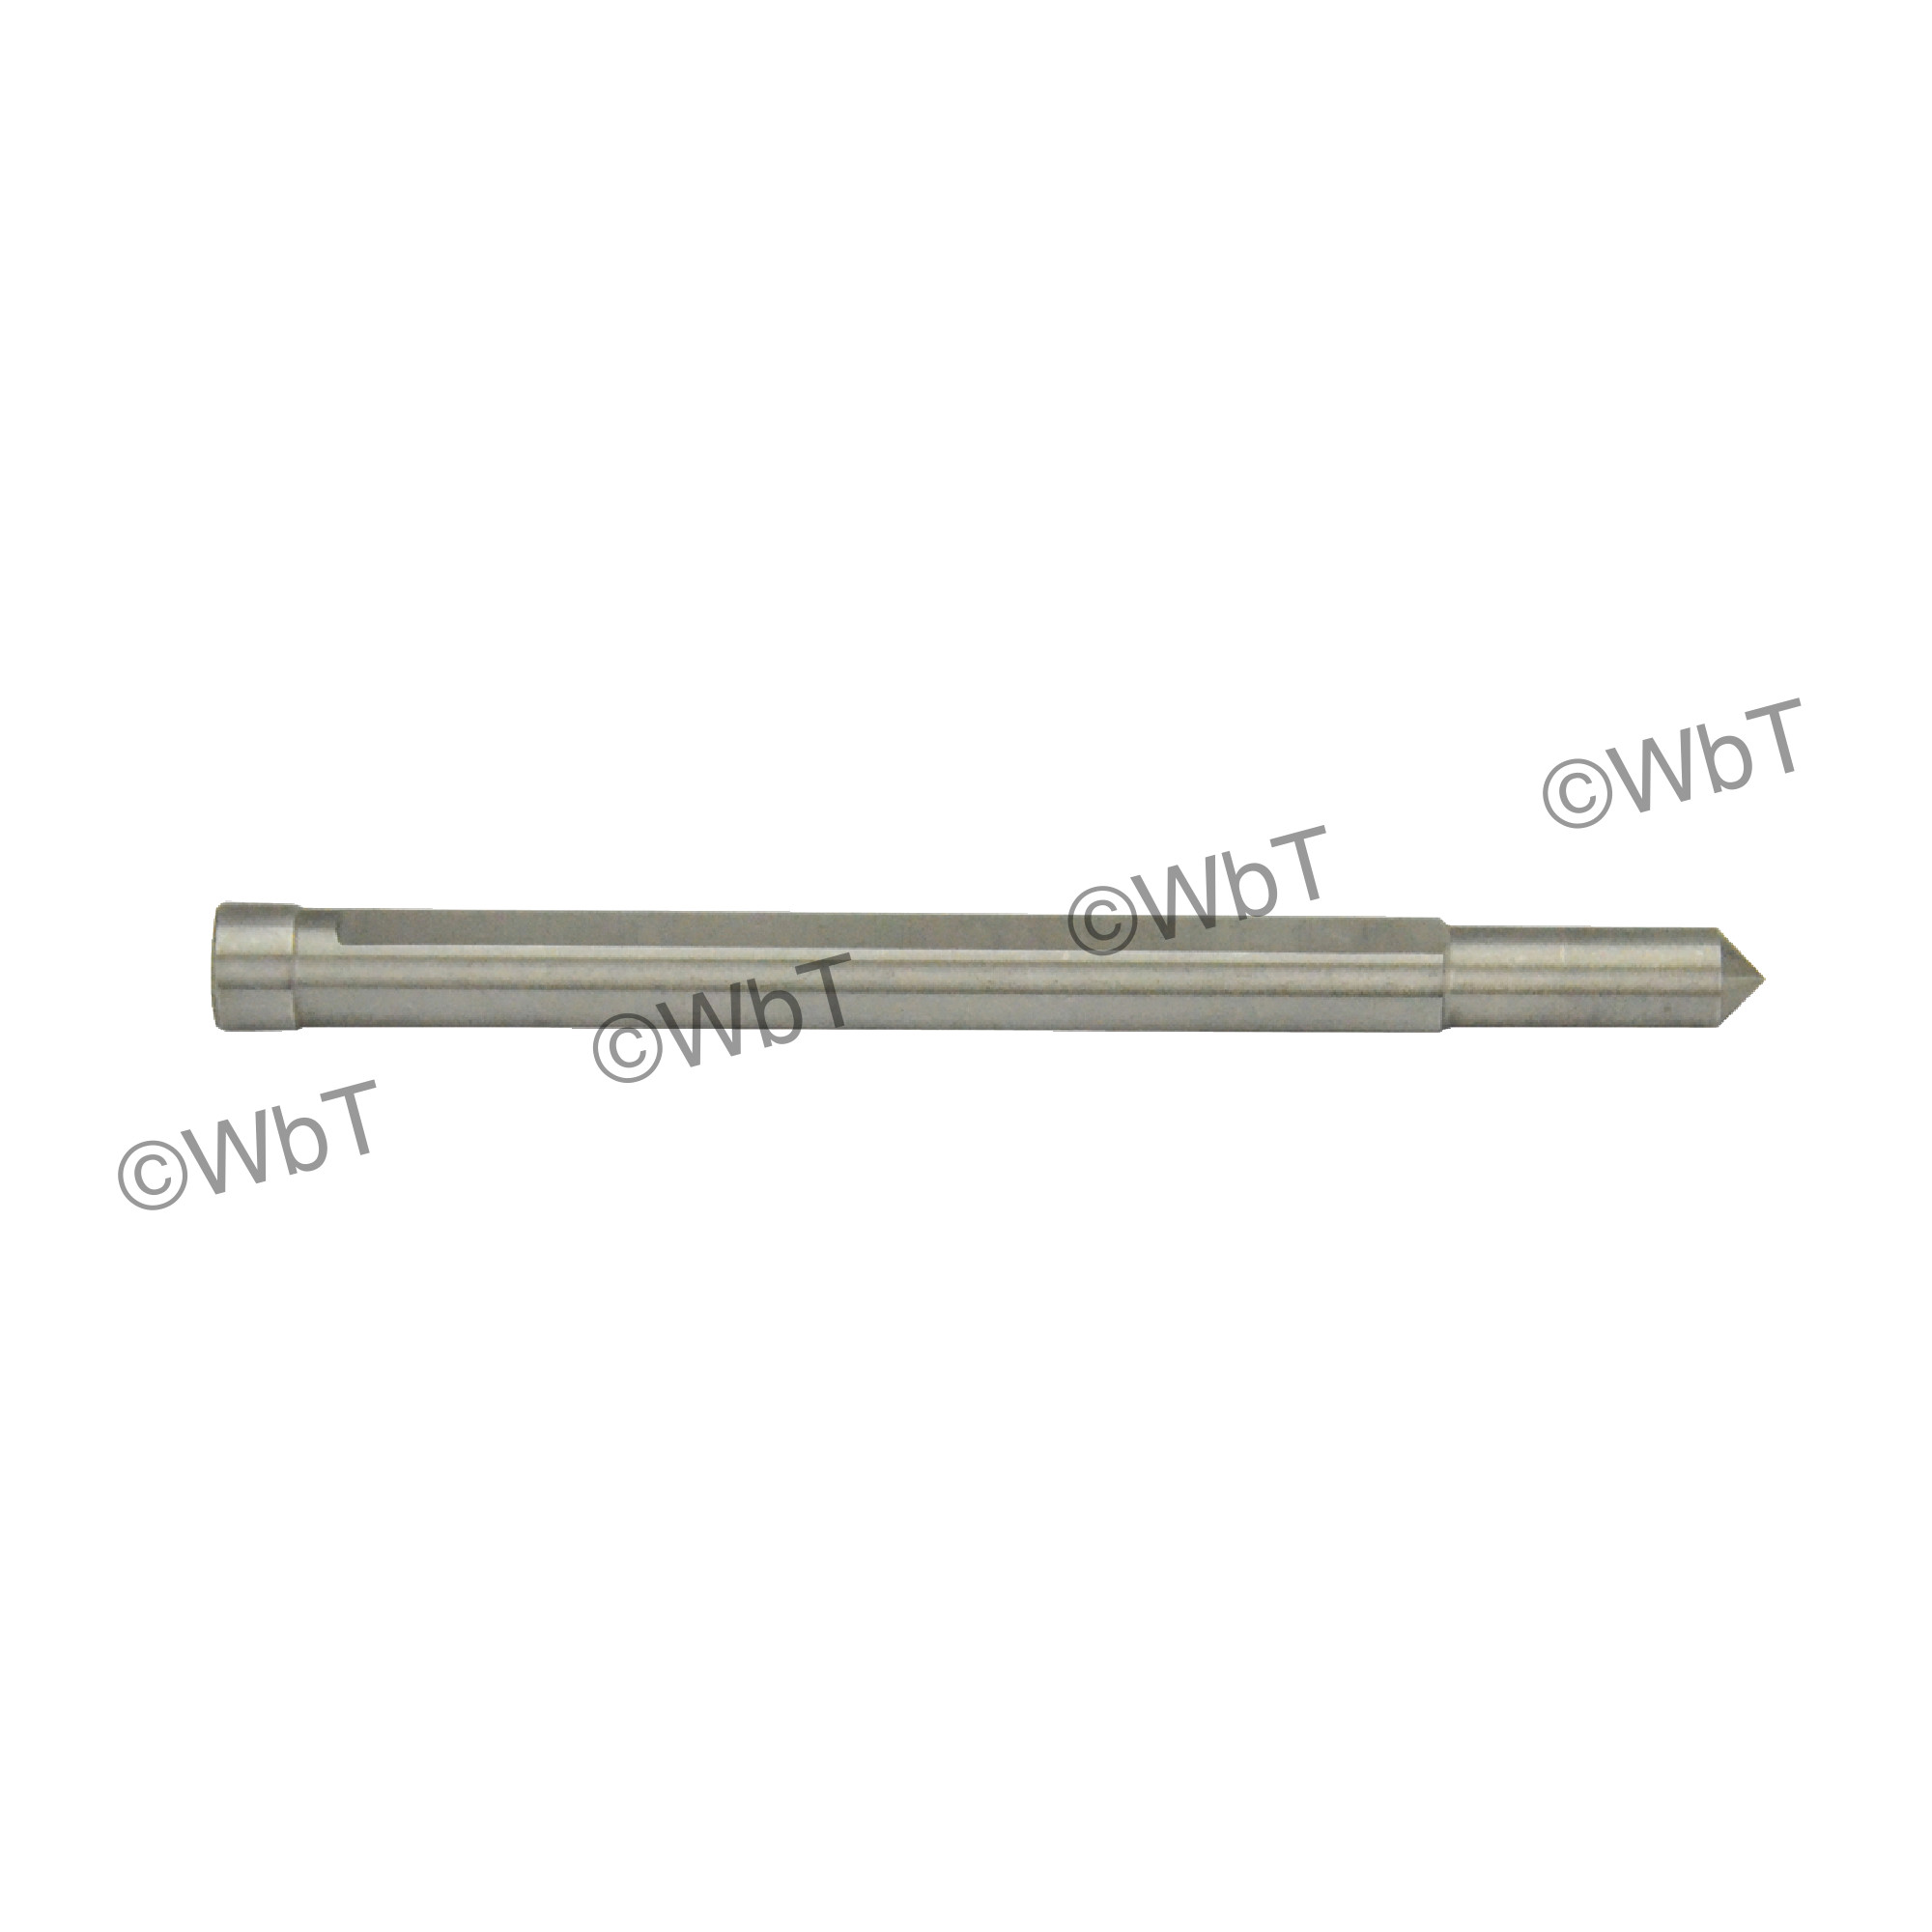 Pilot Pins For Carbide Tipped Cutters